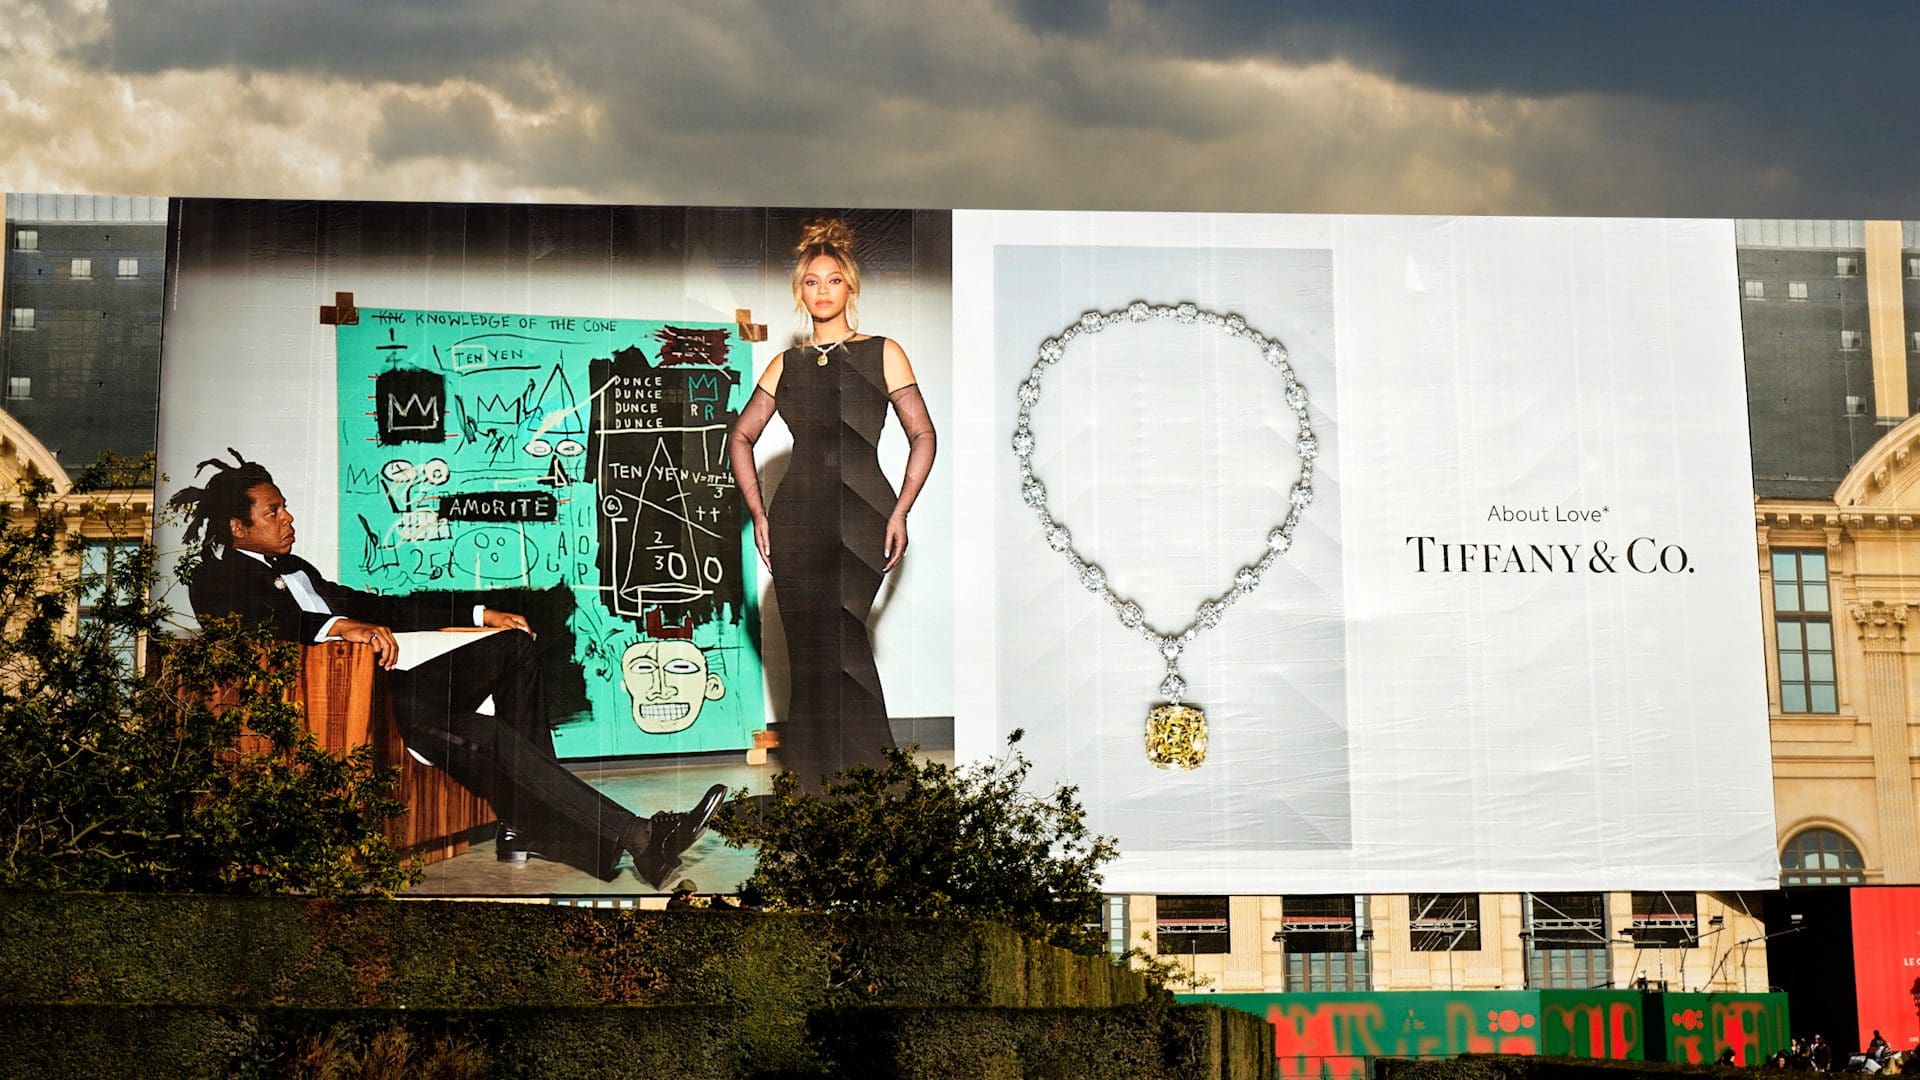 Billboard advertisement featuring a prominent display of Tiffany & Co.'s 'About Love' campaign with images of Jay-Z and Beyoncé alongside an exquisite piece of Tiffany jewelry.